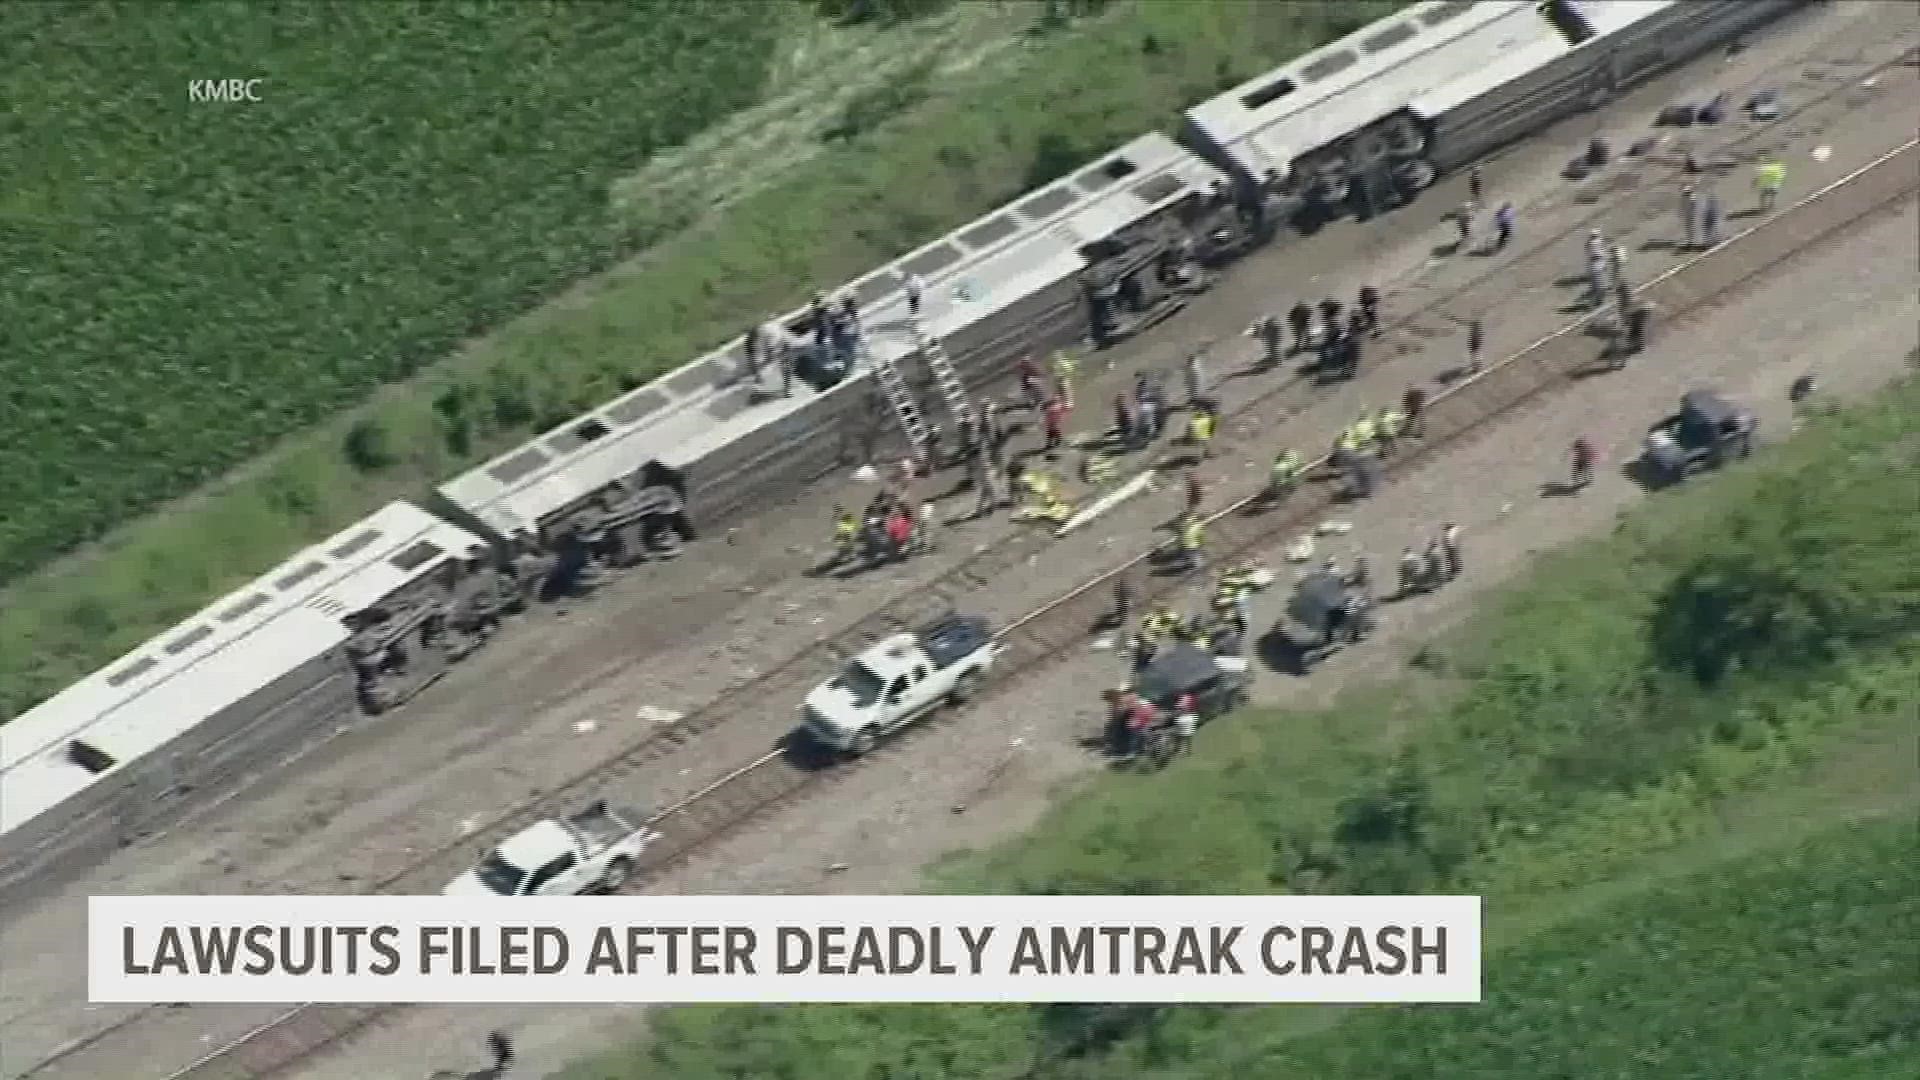 Lawsuits have been filed only days after an Amtrak train collision and derailment in rural Missouri that left four people dead and injured up to 150 others.